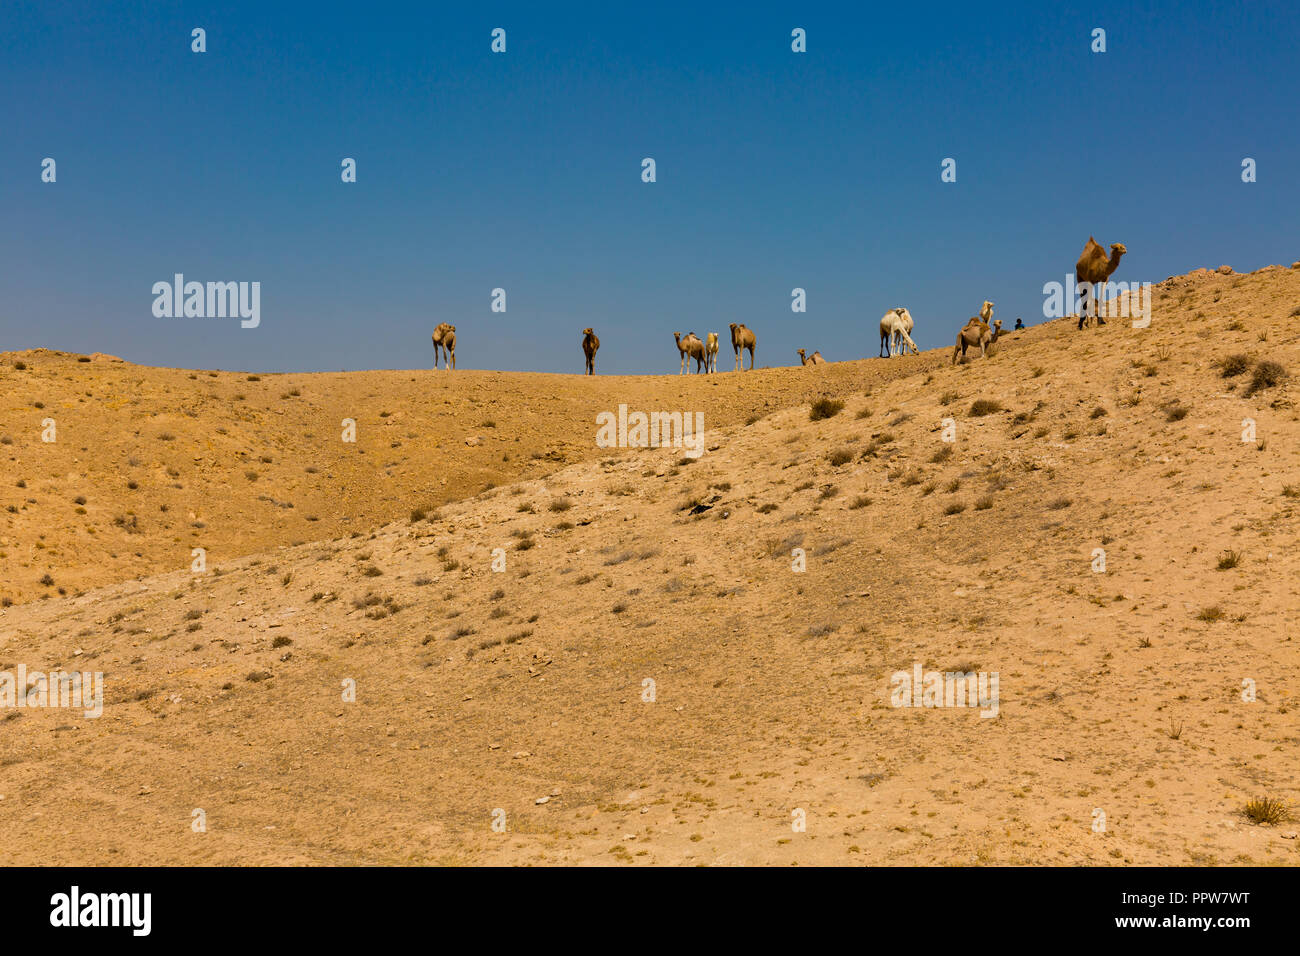 A herd of camels dromedarys in the desert negev in the south of Israel Stock Photo